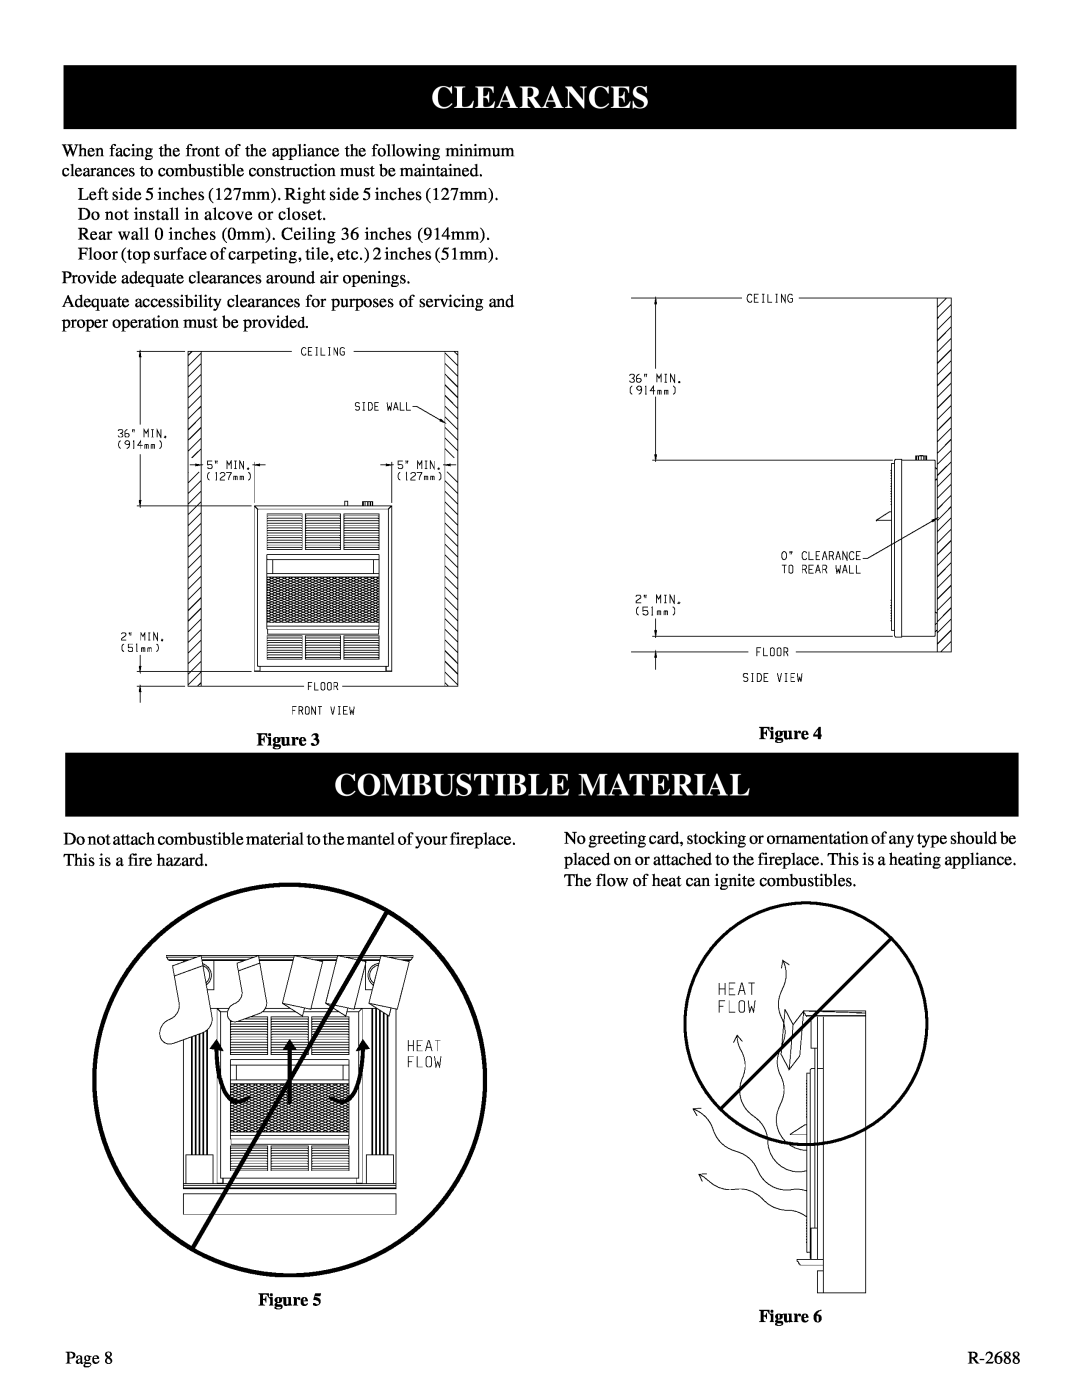 Empire Products EE-25-2 installation instructions Clearances, Combustible Material, Figure Figure 